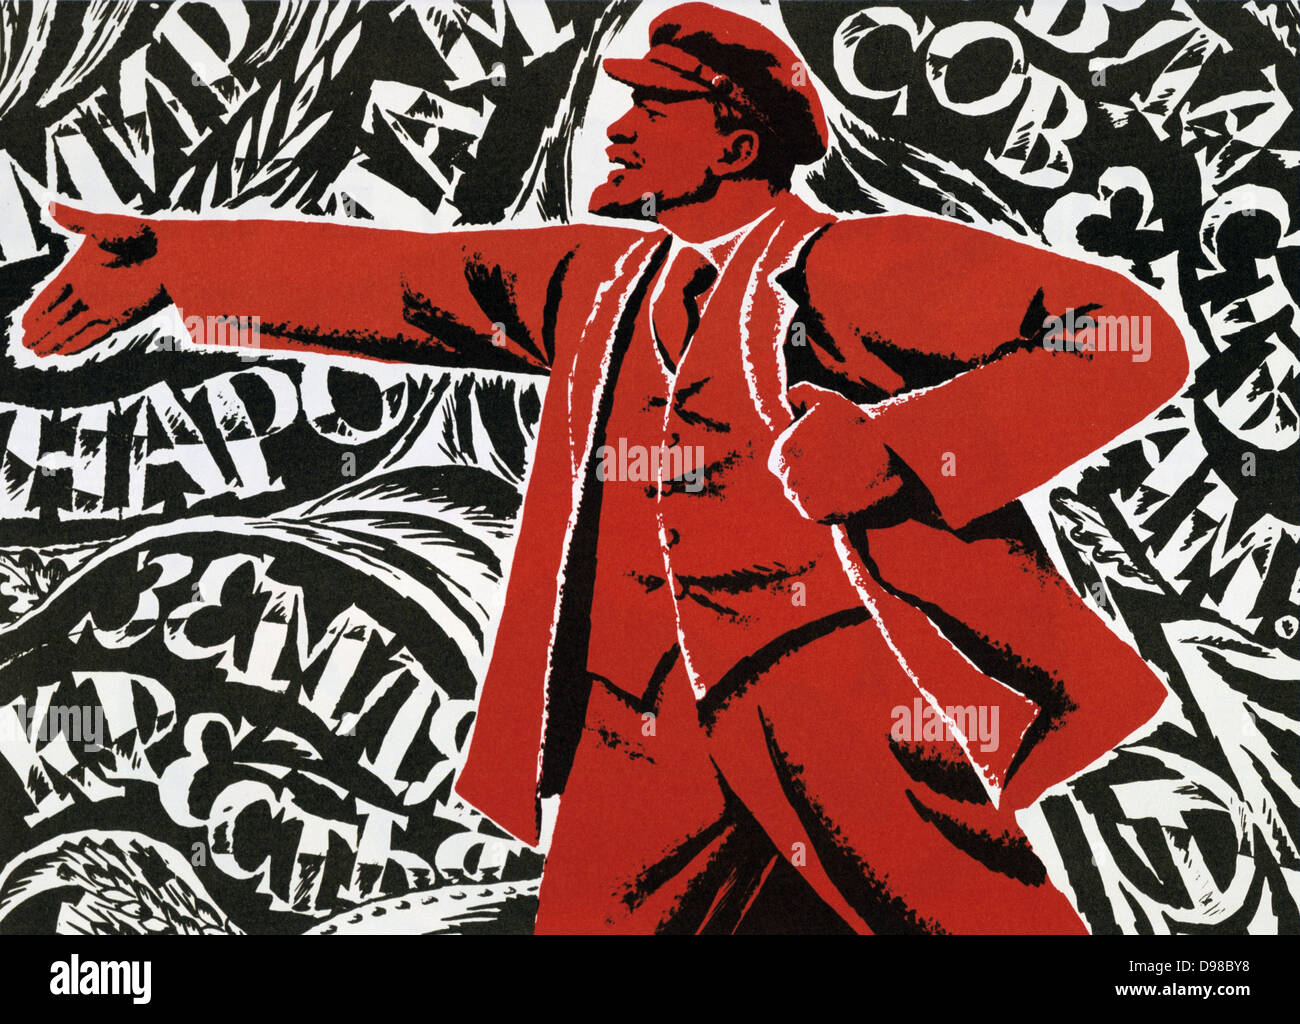 Image result for russian revolution posters